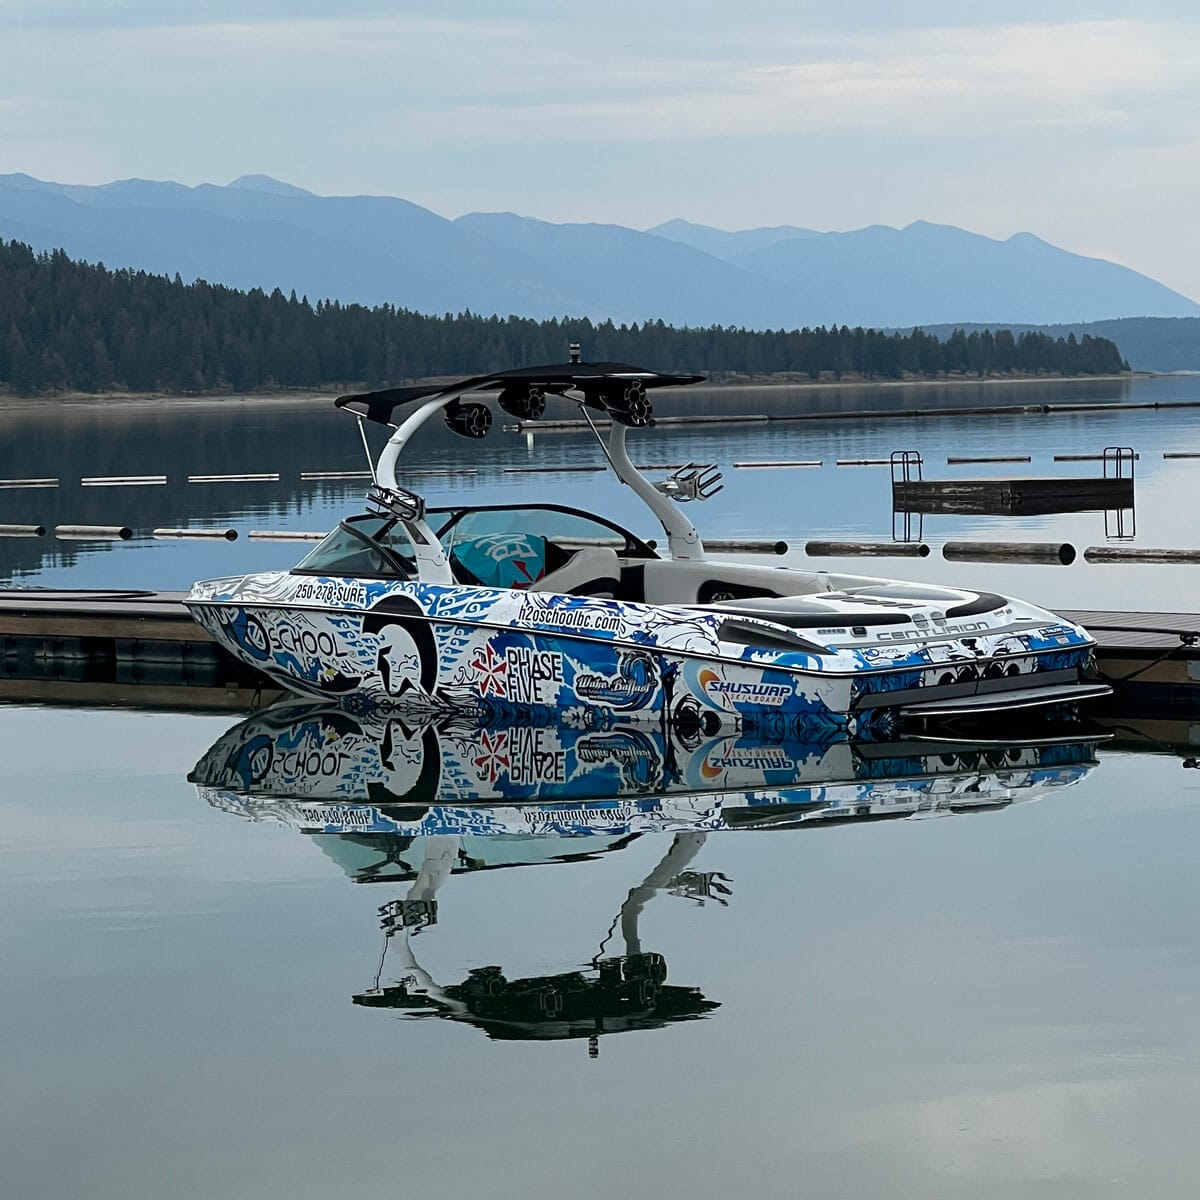 A wakeboat docked in a lake with mountains in the background.